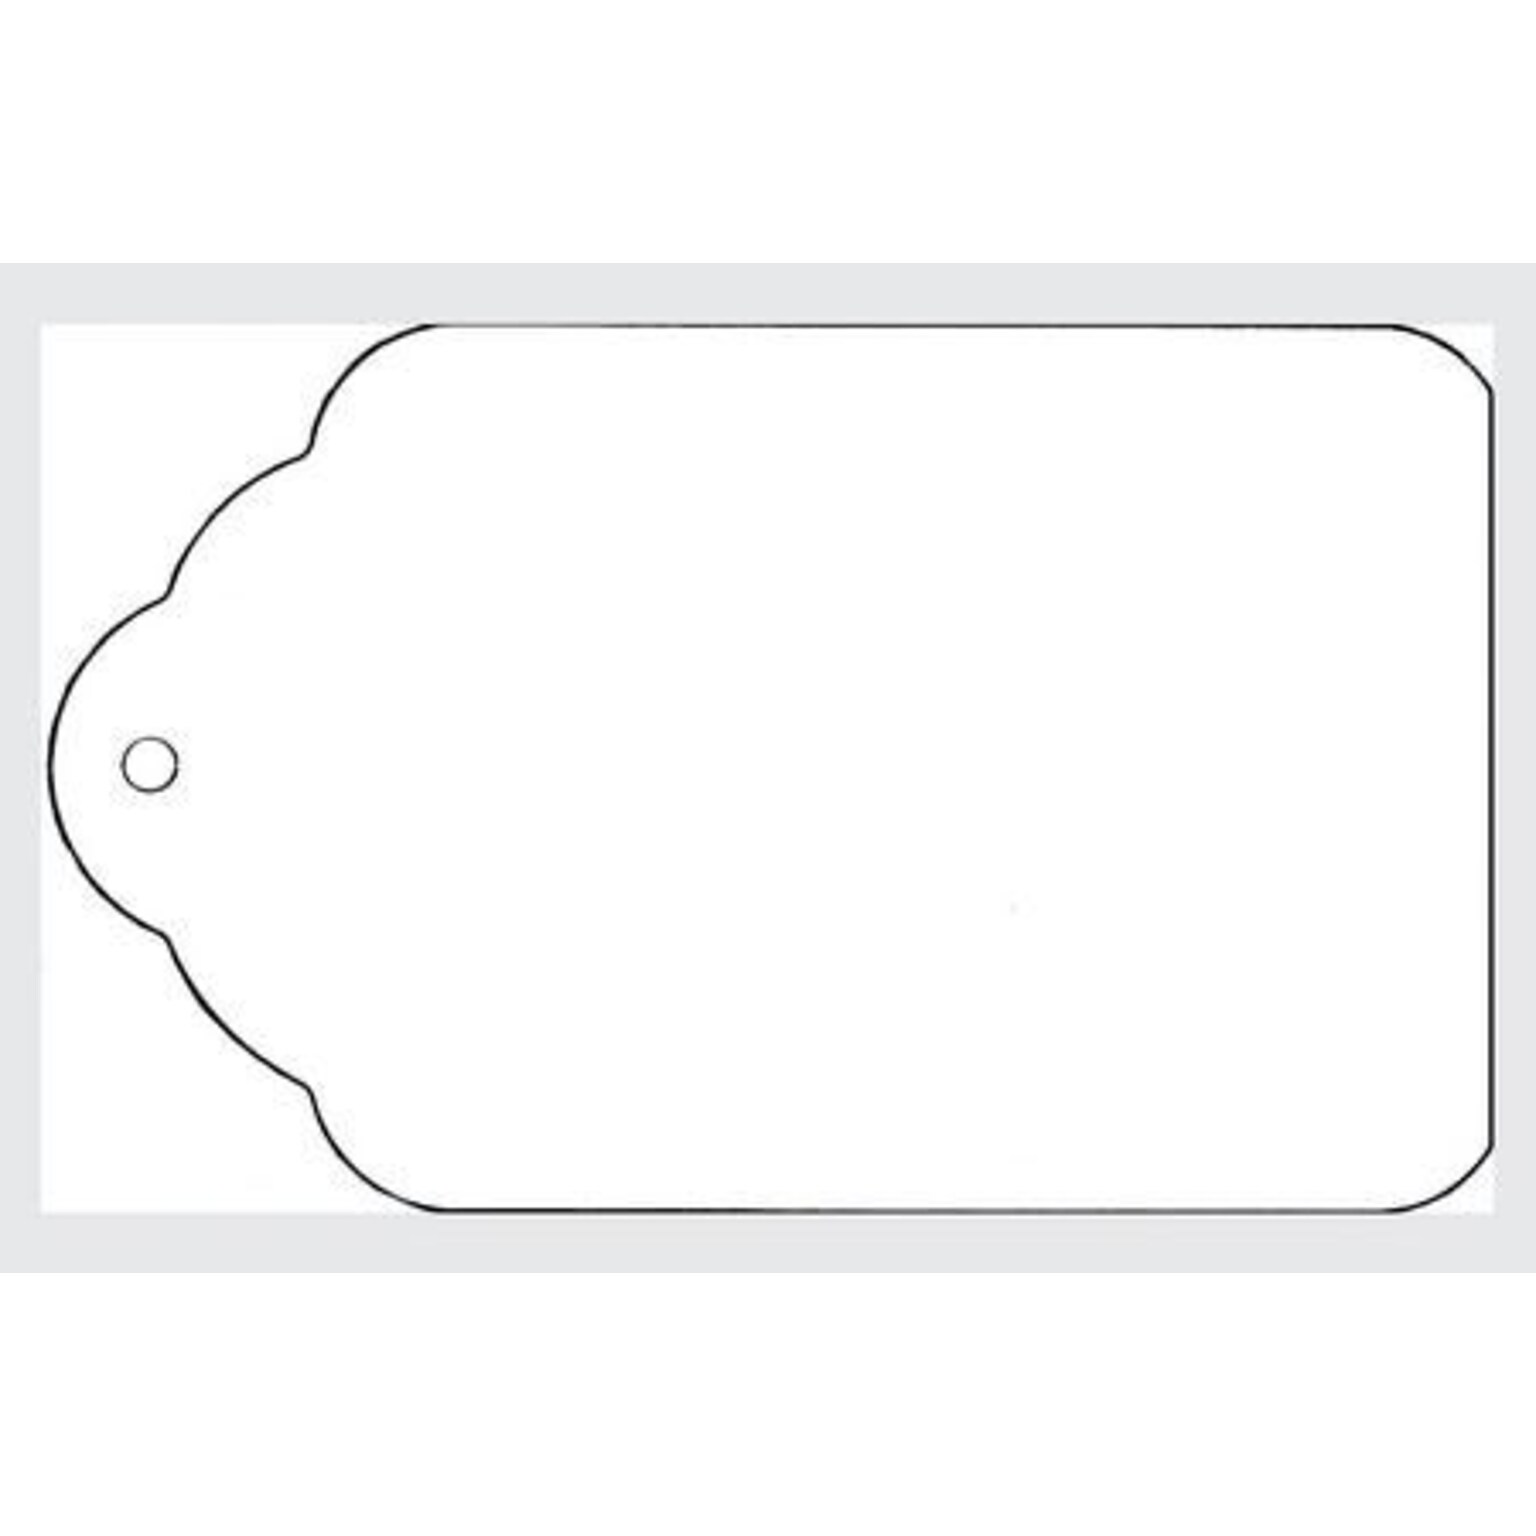 NAHANCO 1 3/4 x 2 11/16 Strung All Purpose Merchandise Tag, White, 1000/Pack